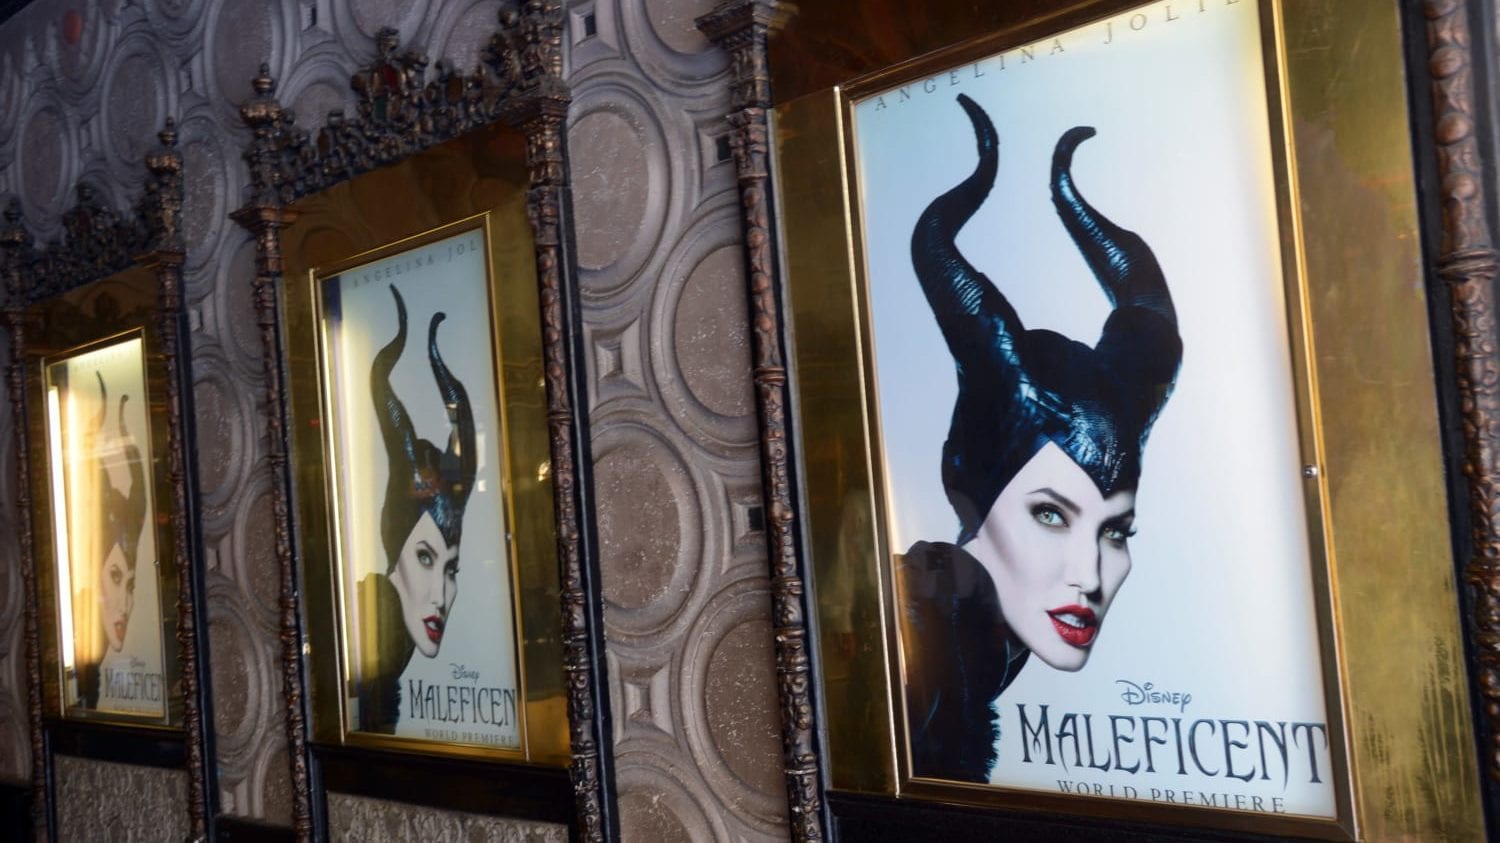 The World Premiere Of Disney's 'Maleficent'